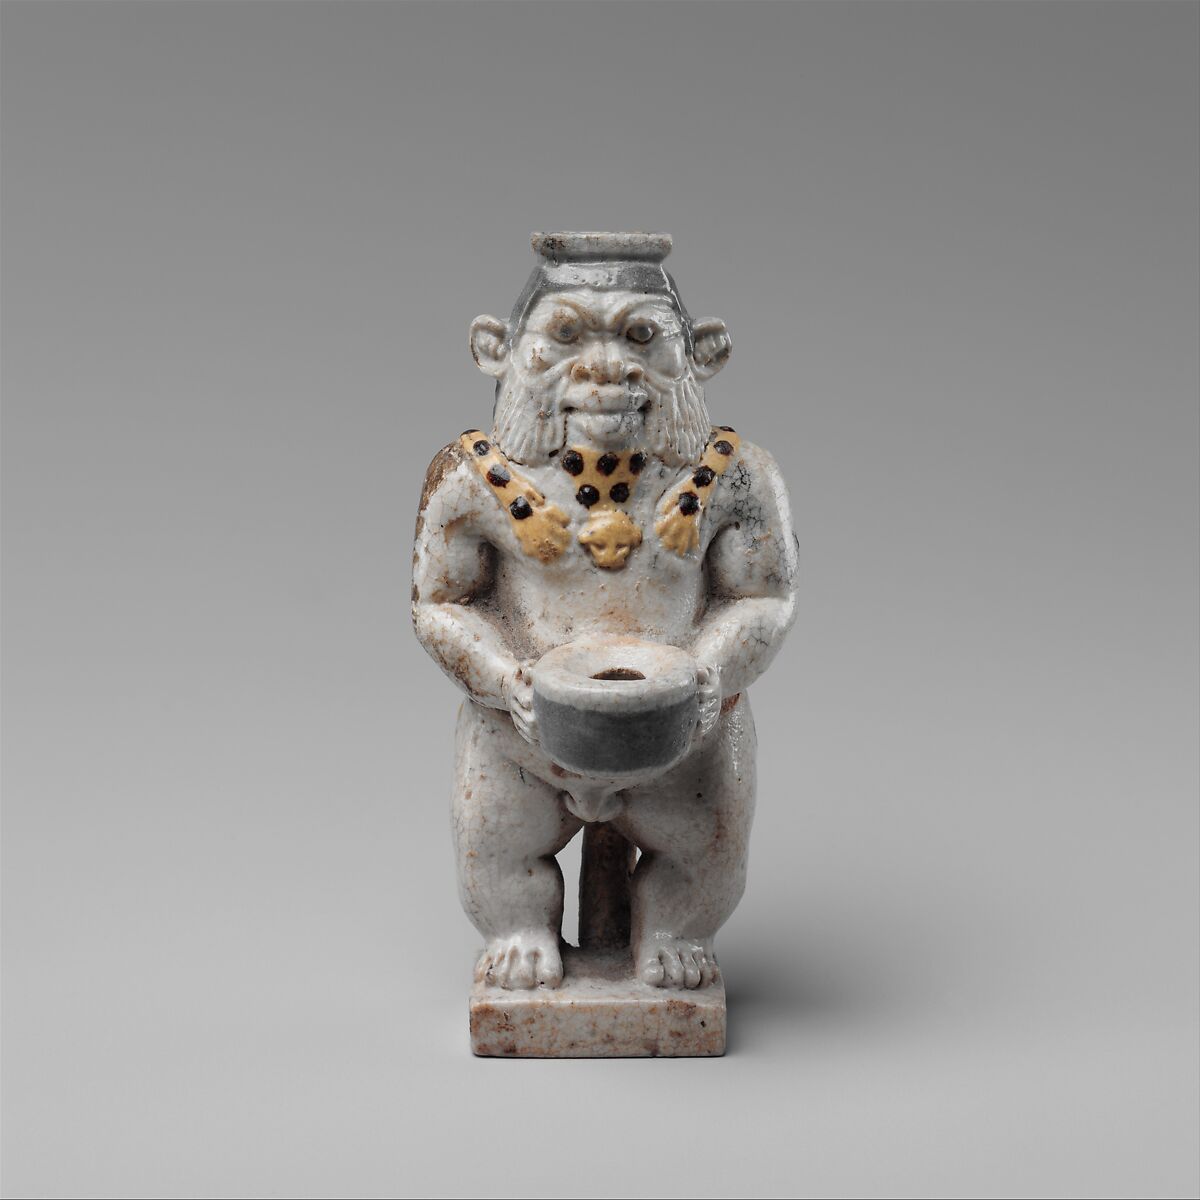 Cosmetic Container in the Form of a Bes-image, Faience 